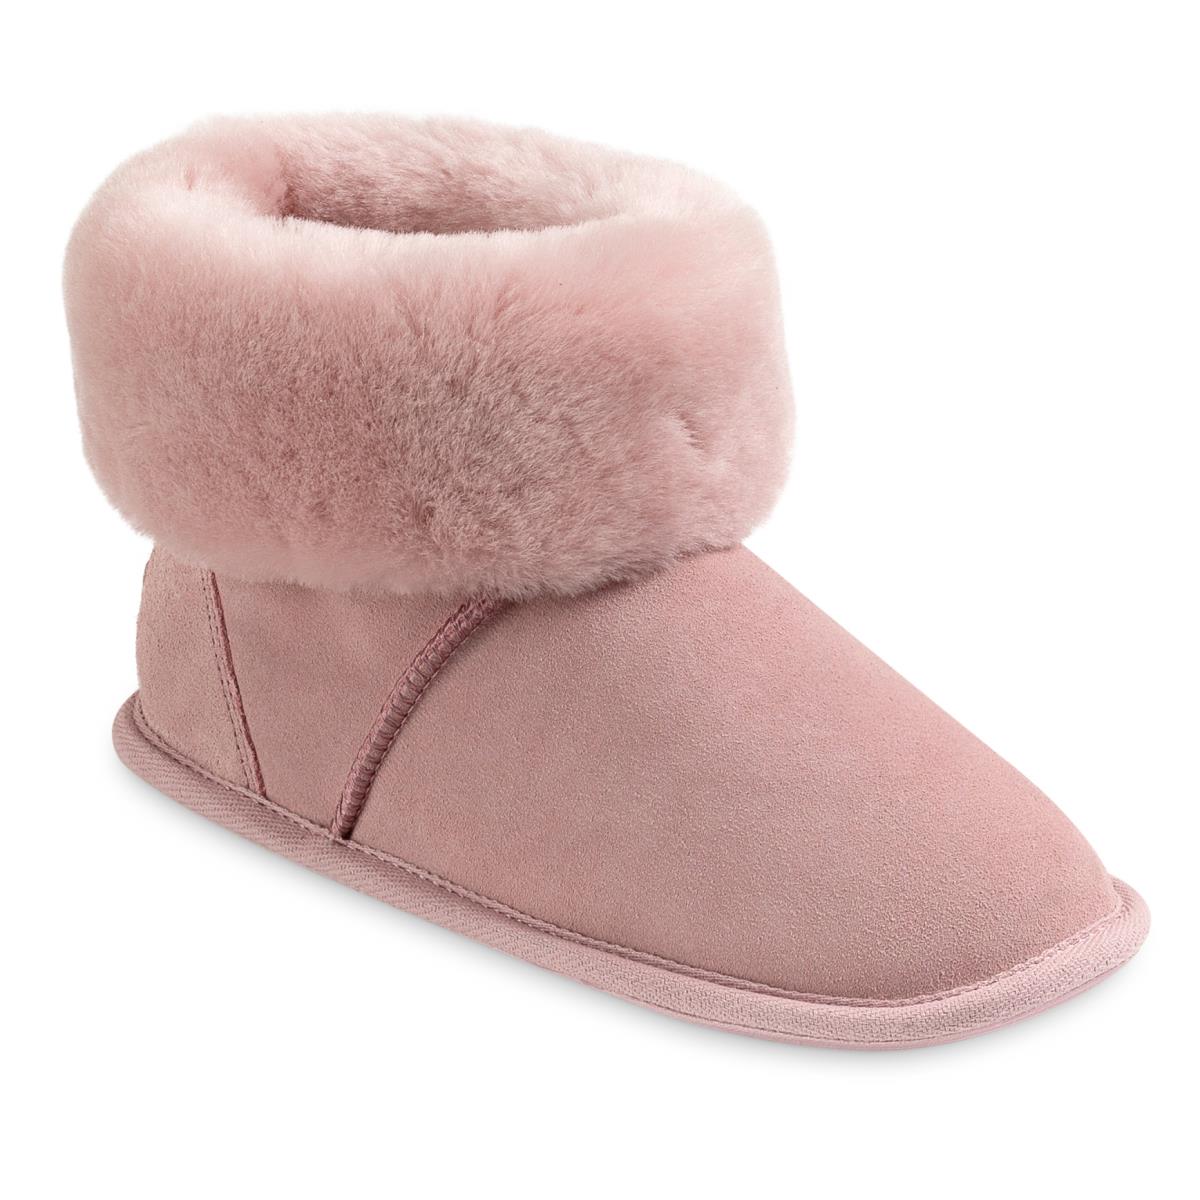 Ladies Albery Sheepskin Slippers | Just Sheepskin Slippers and Boots